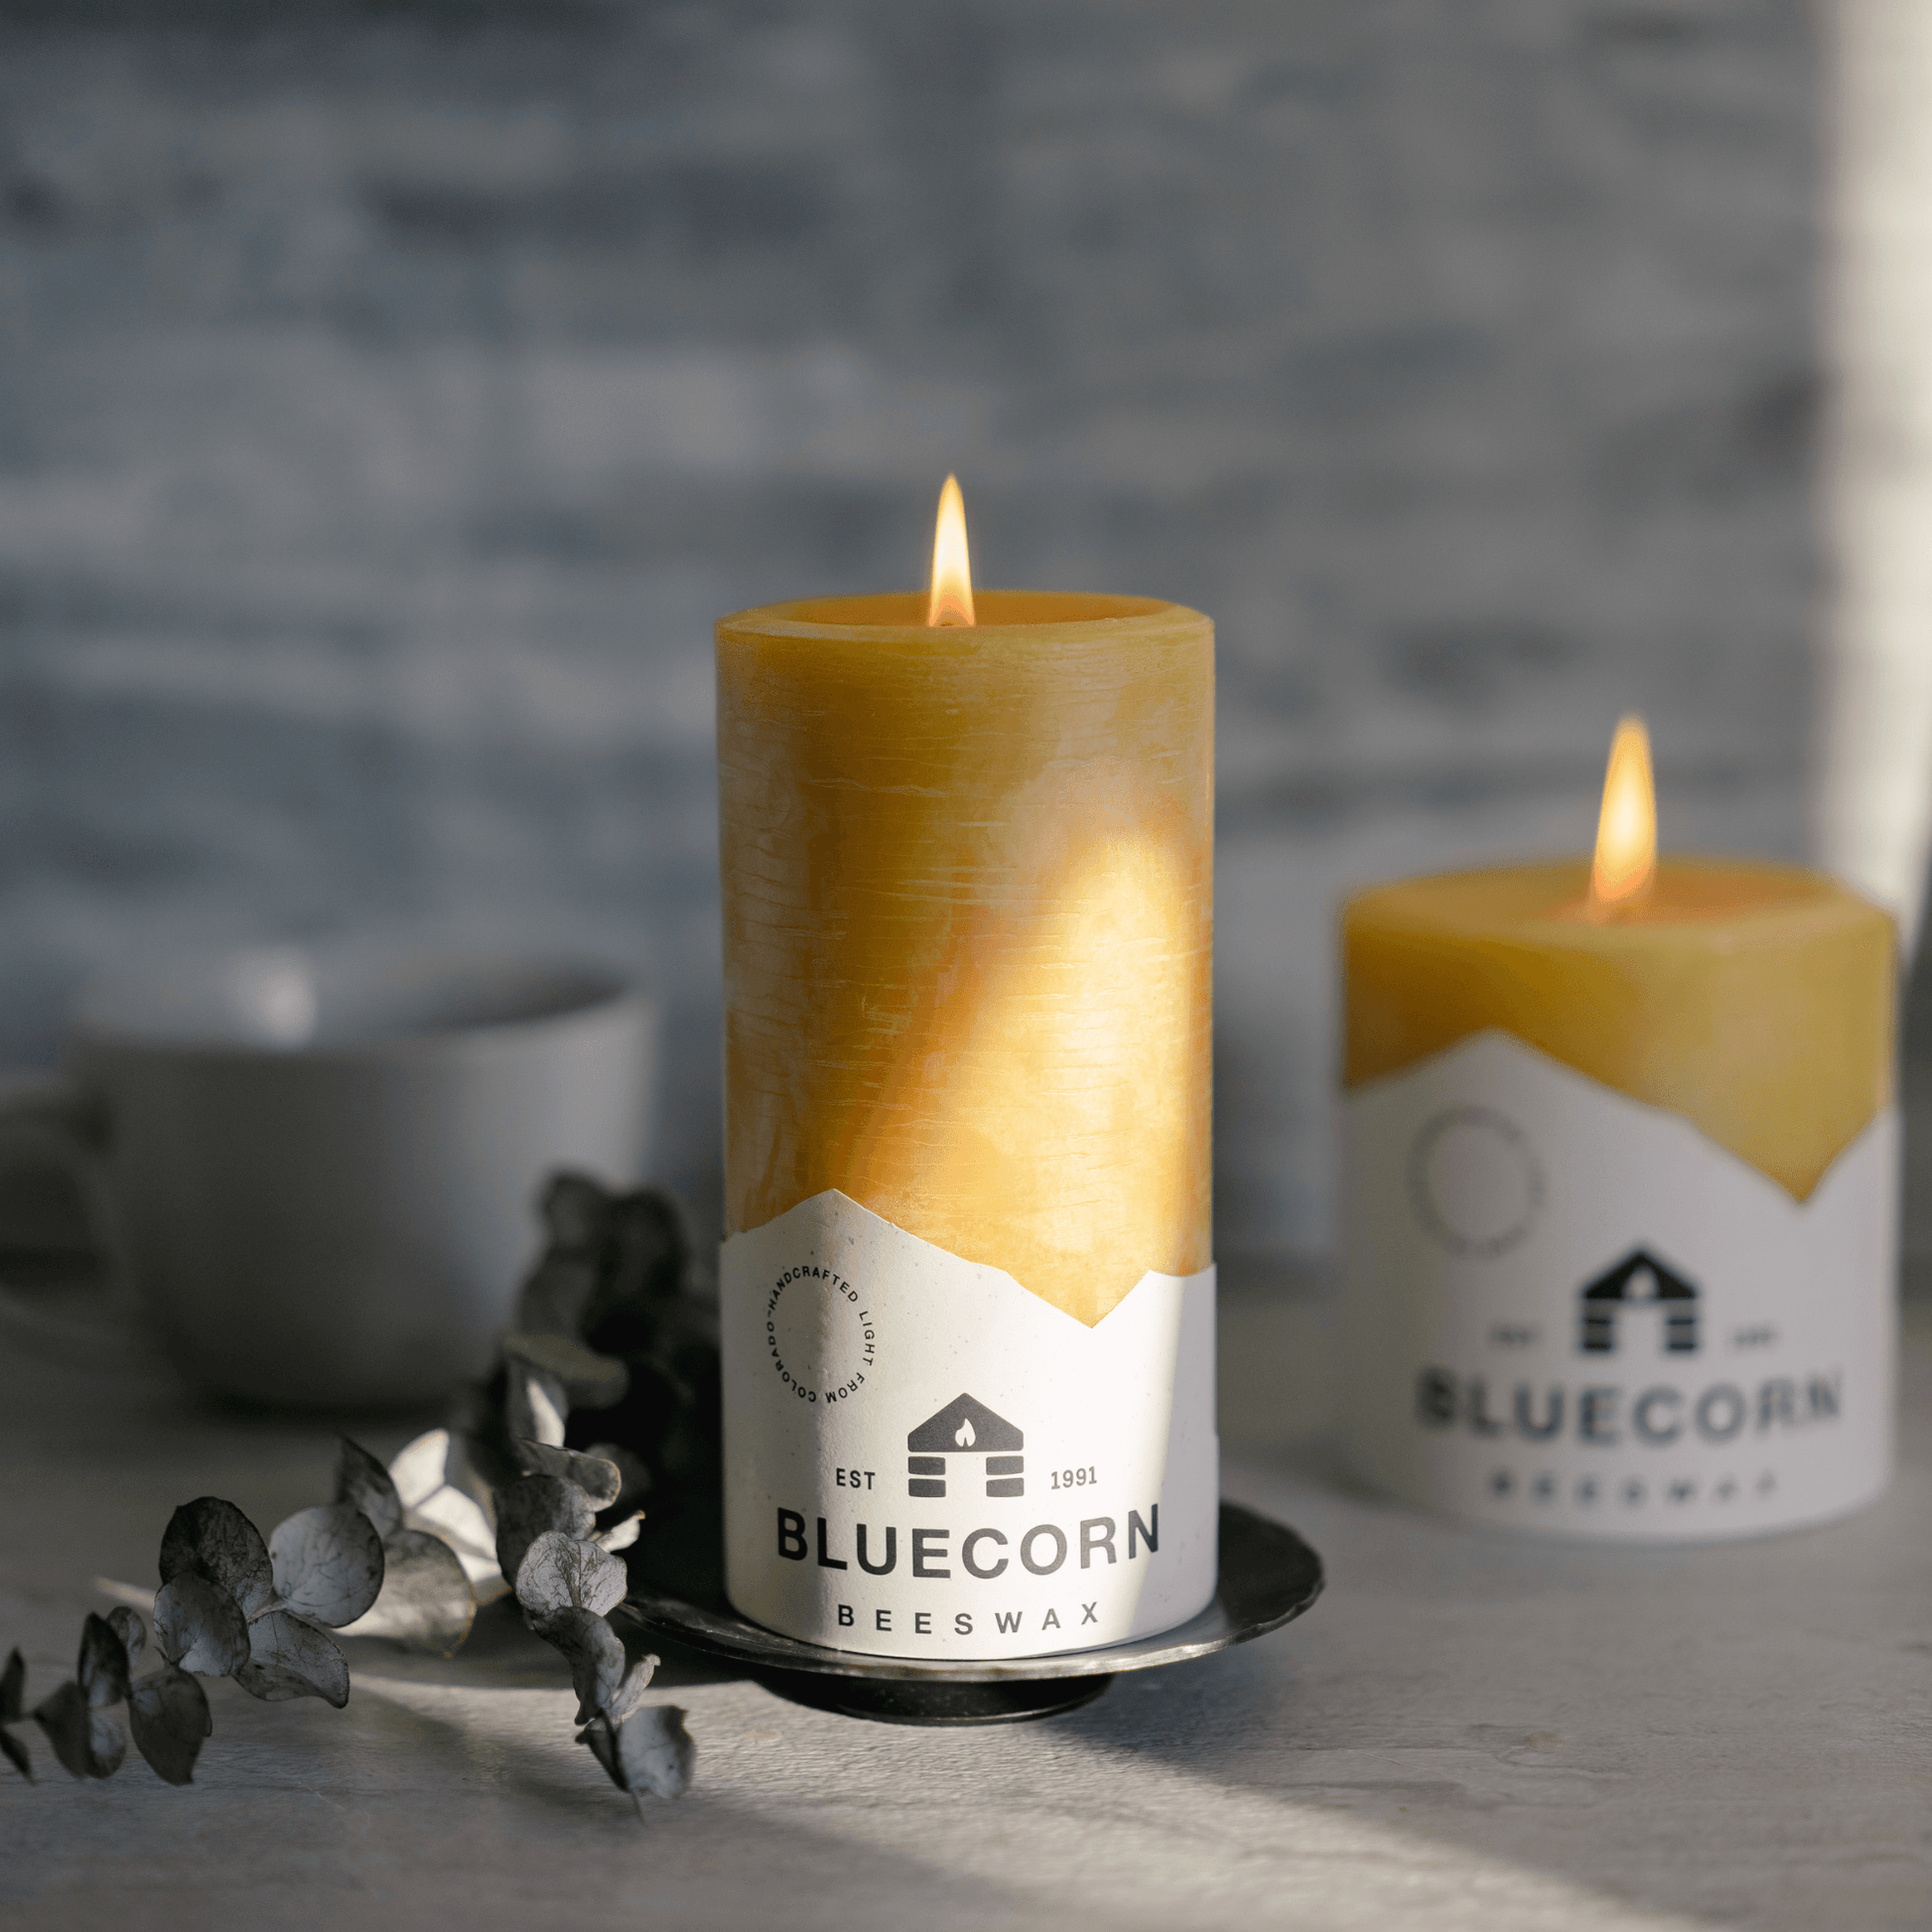 Bluecorn Beeswax 100% Raw Beeswax Candle in 50% Recycled Glass (3 Dia. x 5 Tall) 85 Hour Burn Time (1, Clear)